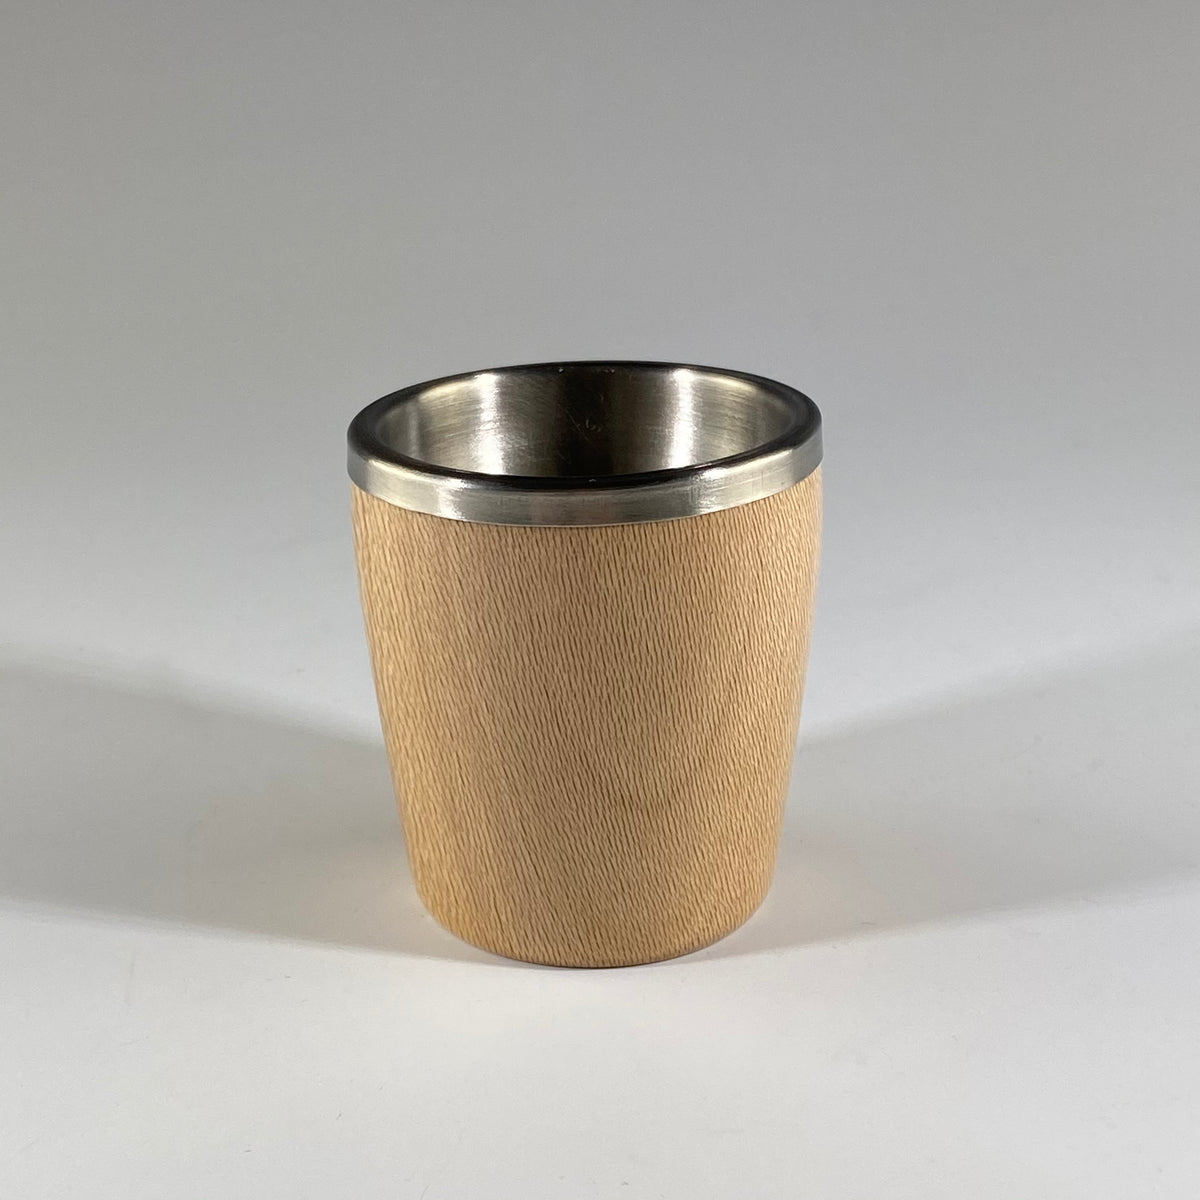 Wood Shot Glass - Heart of the Home PA